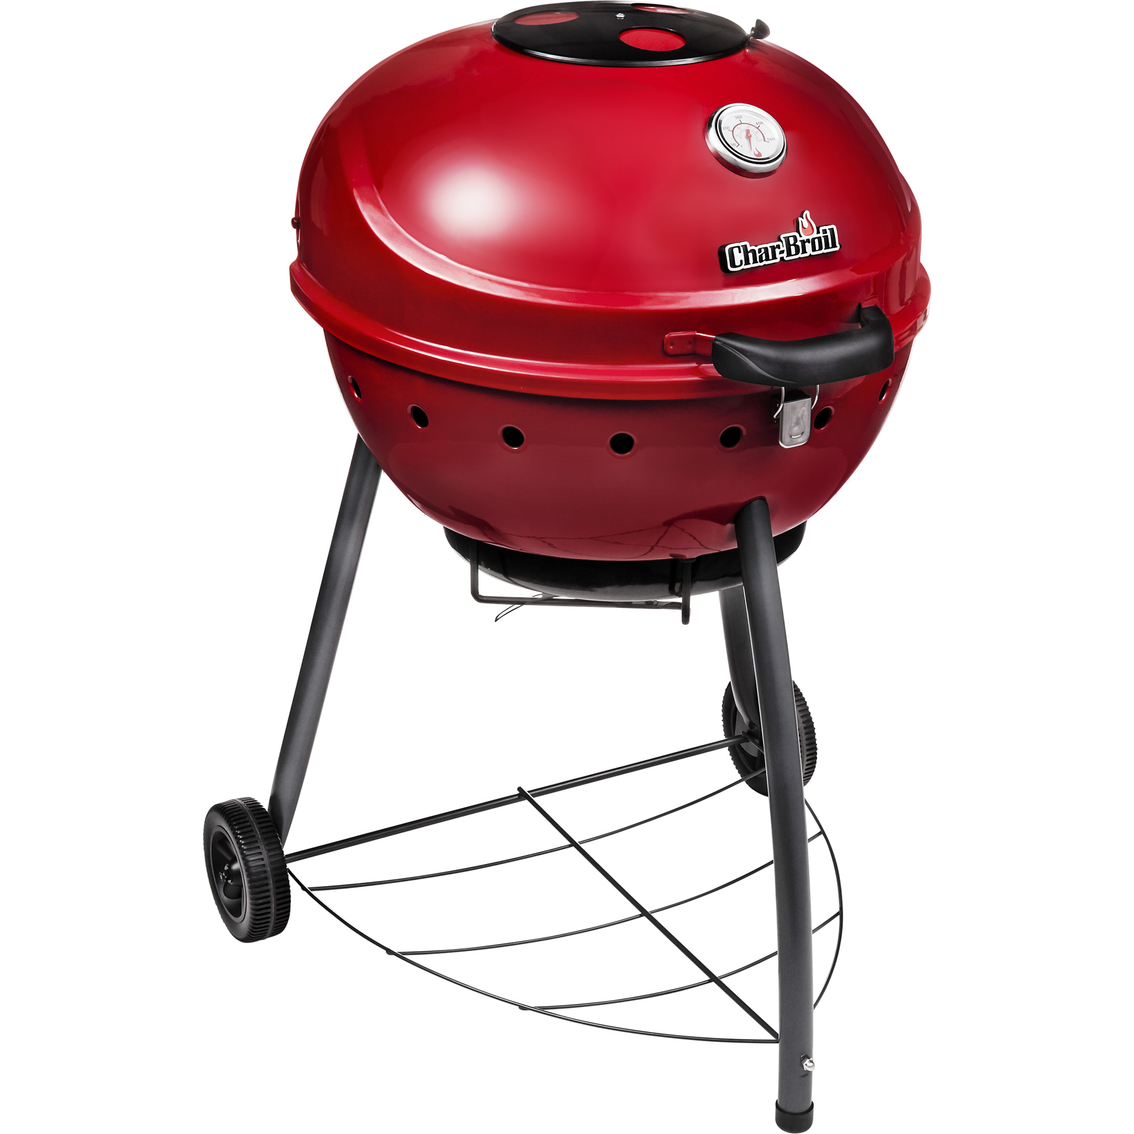 Char-Broil Red Kettleman Charcoal Grill - Image 3 of 5